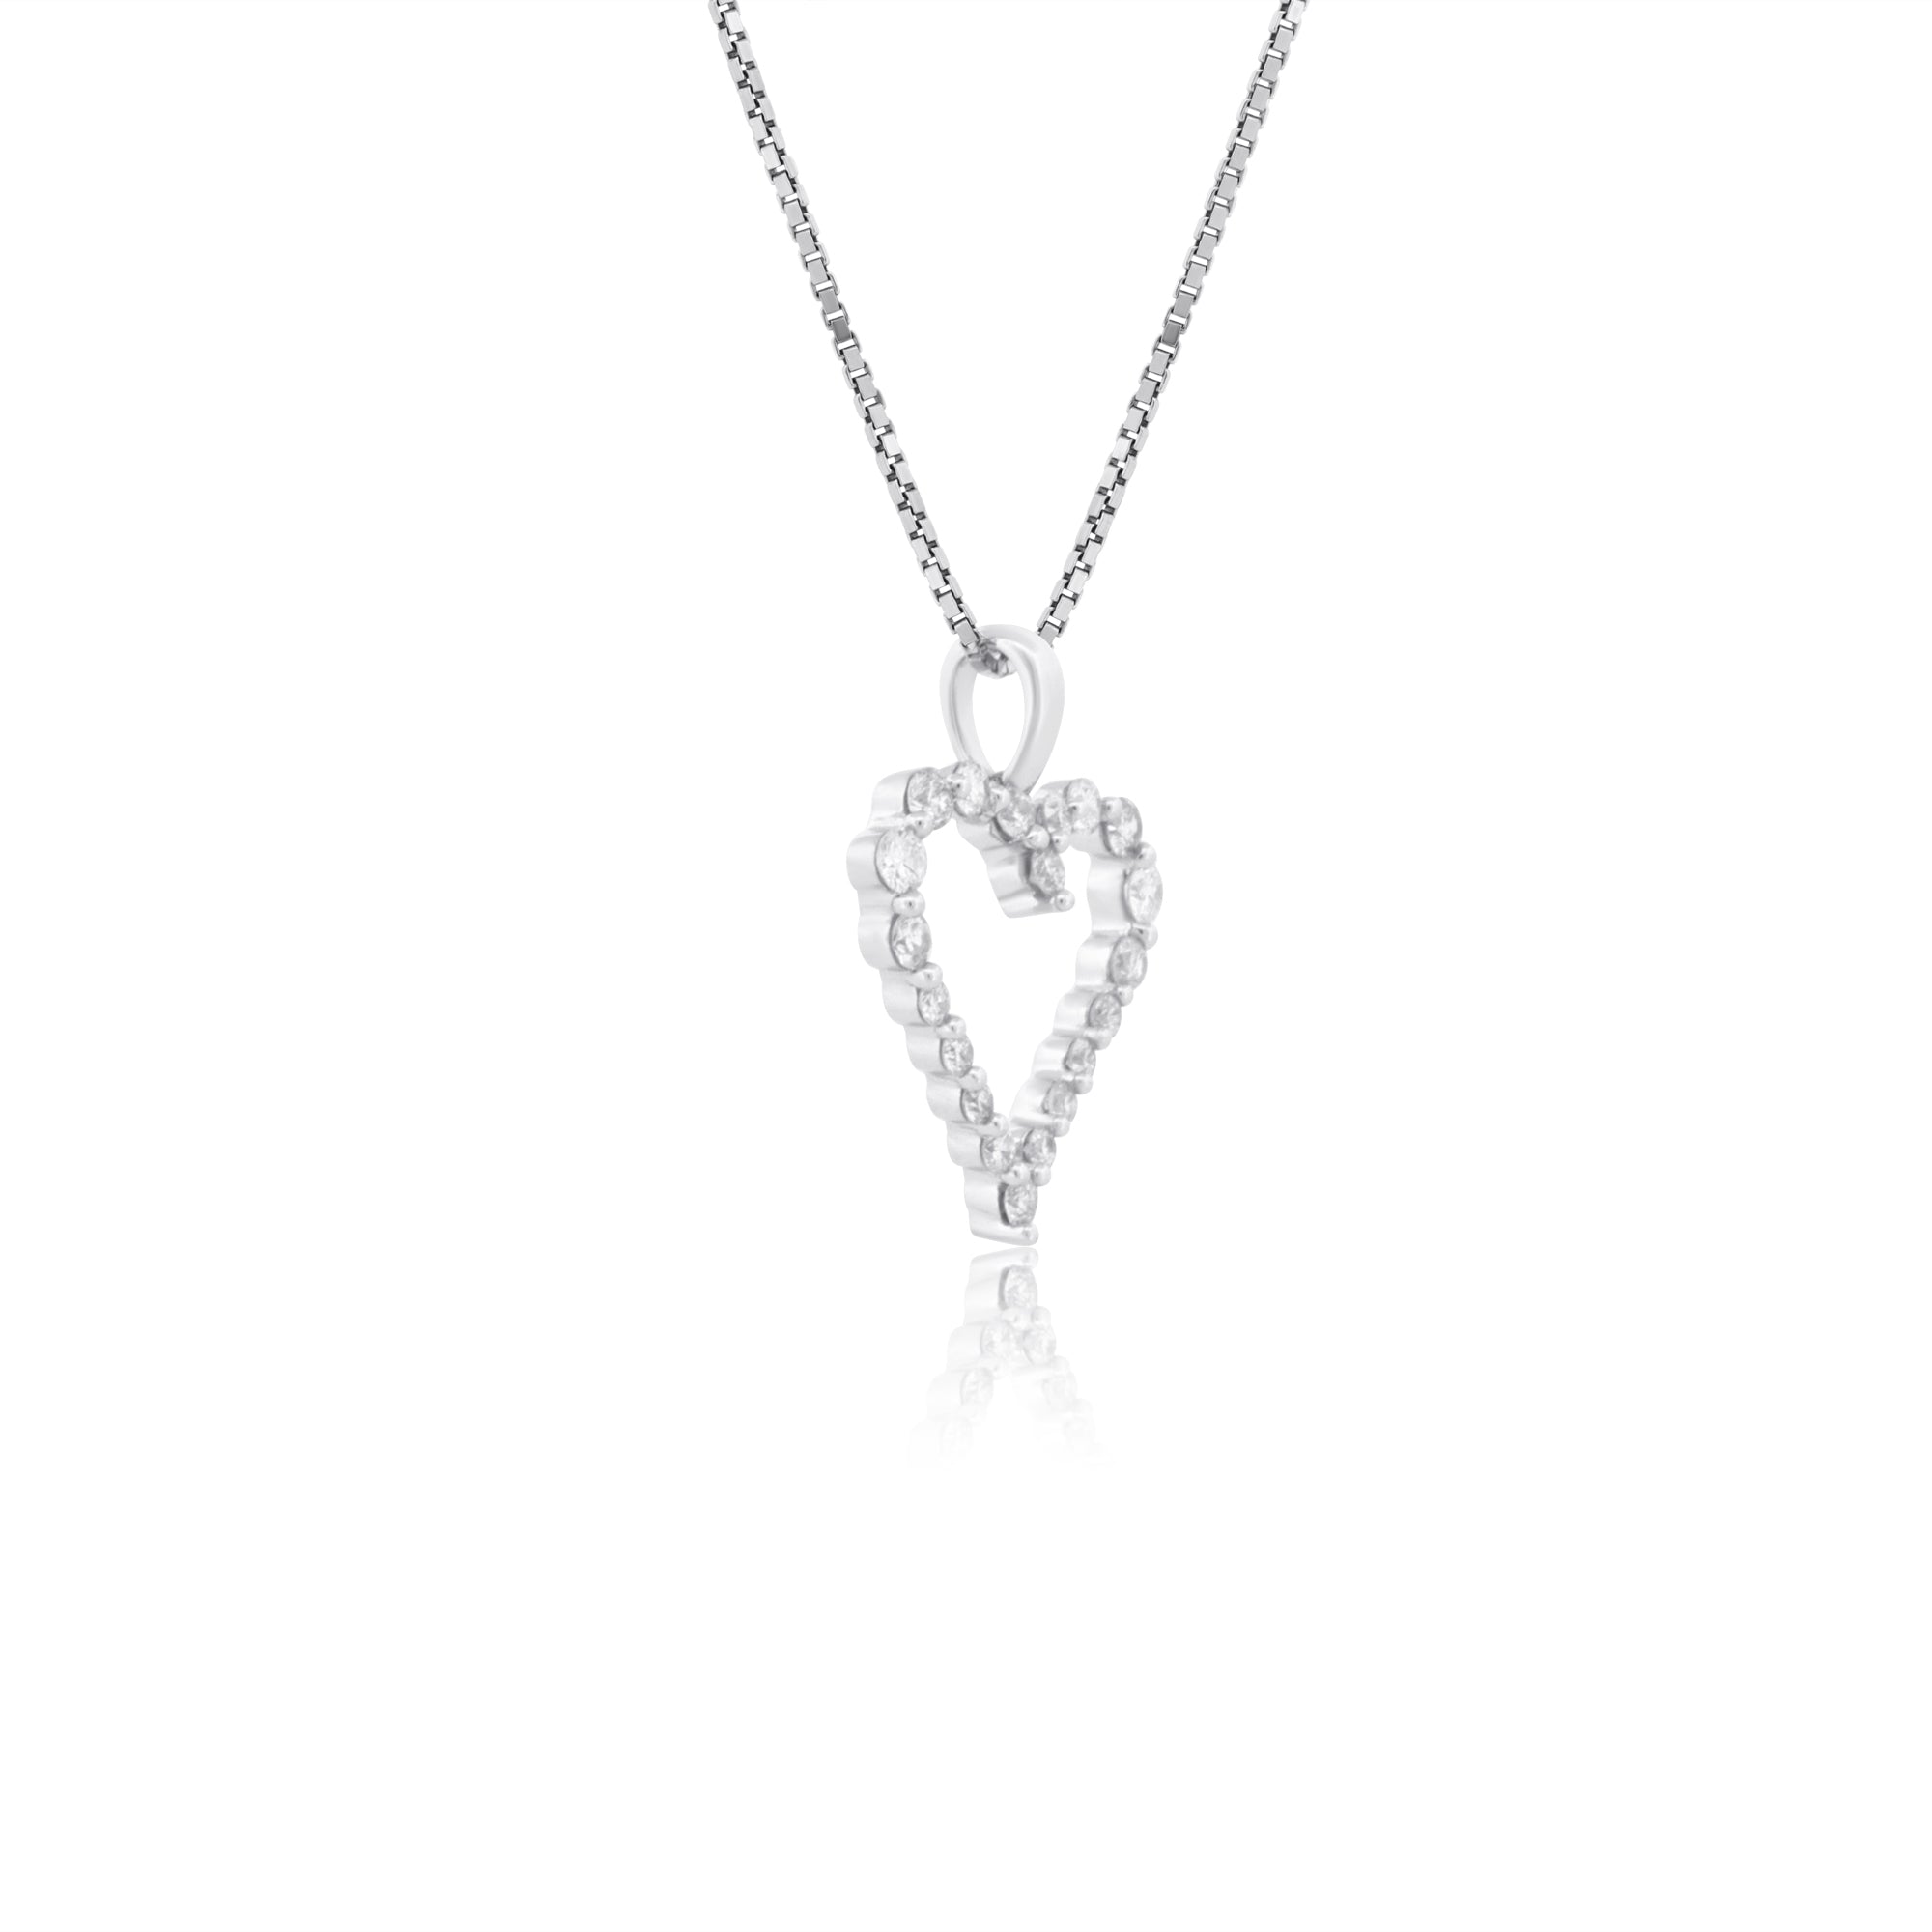 14k White Gold with 0.24Ctw White Diamond lined Heart Necklace